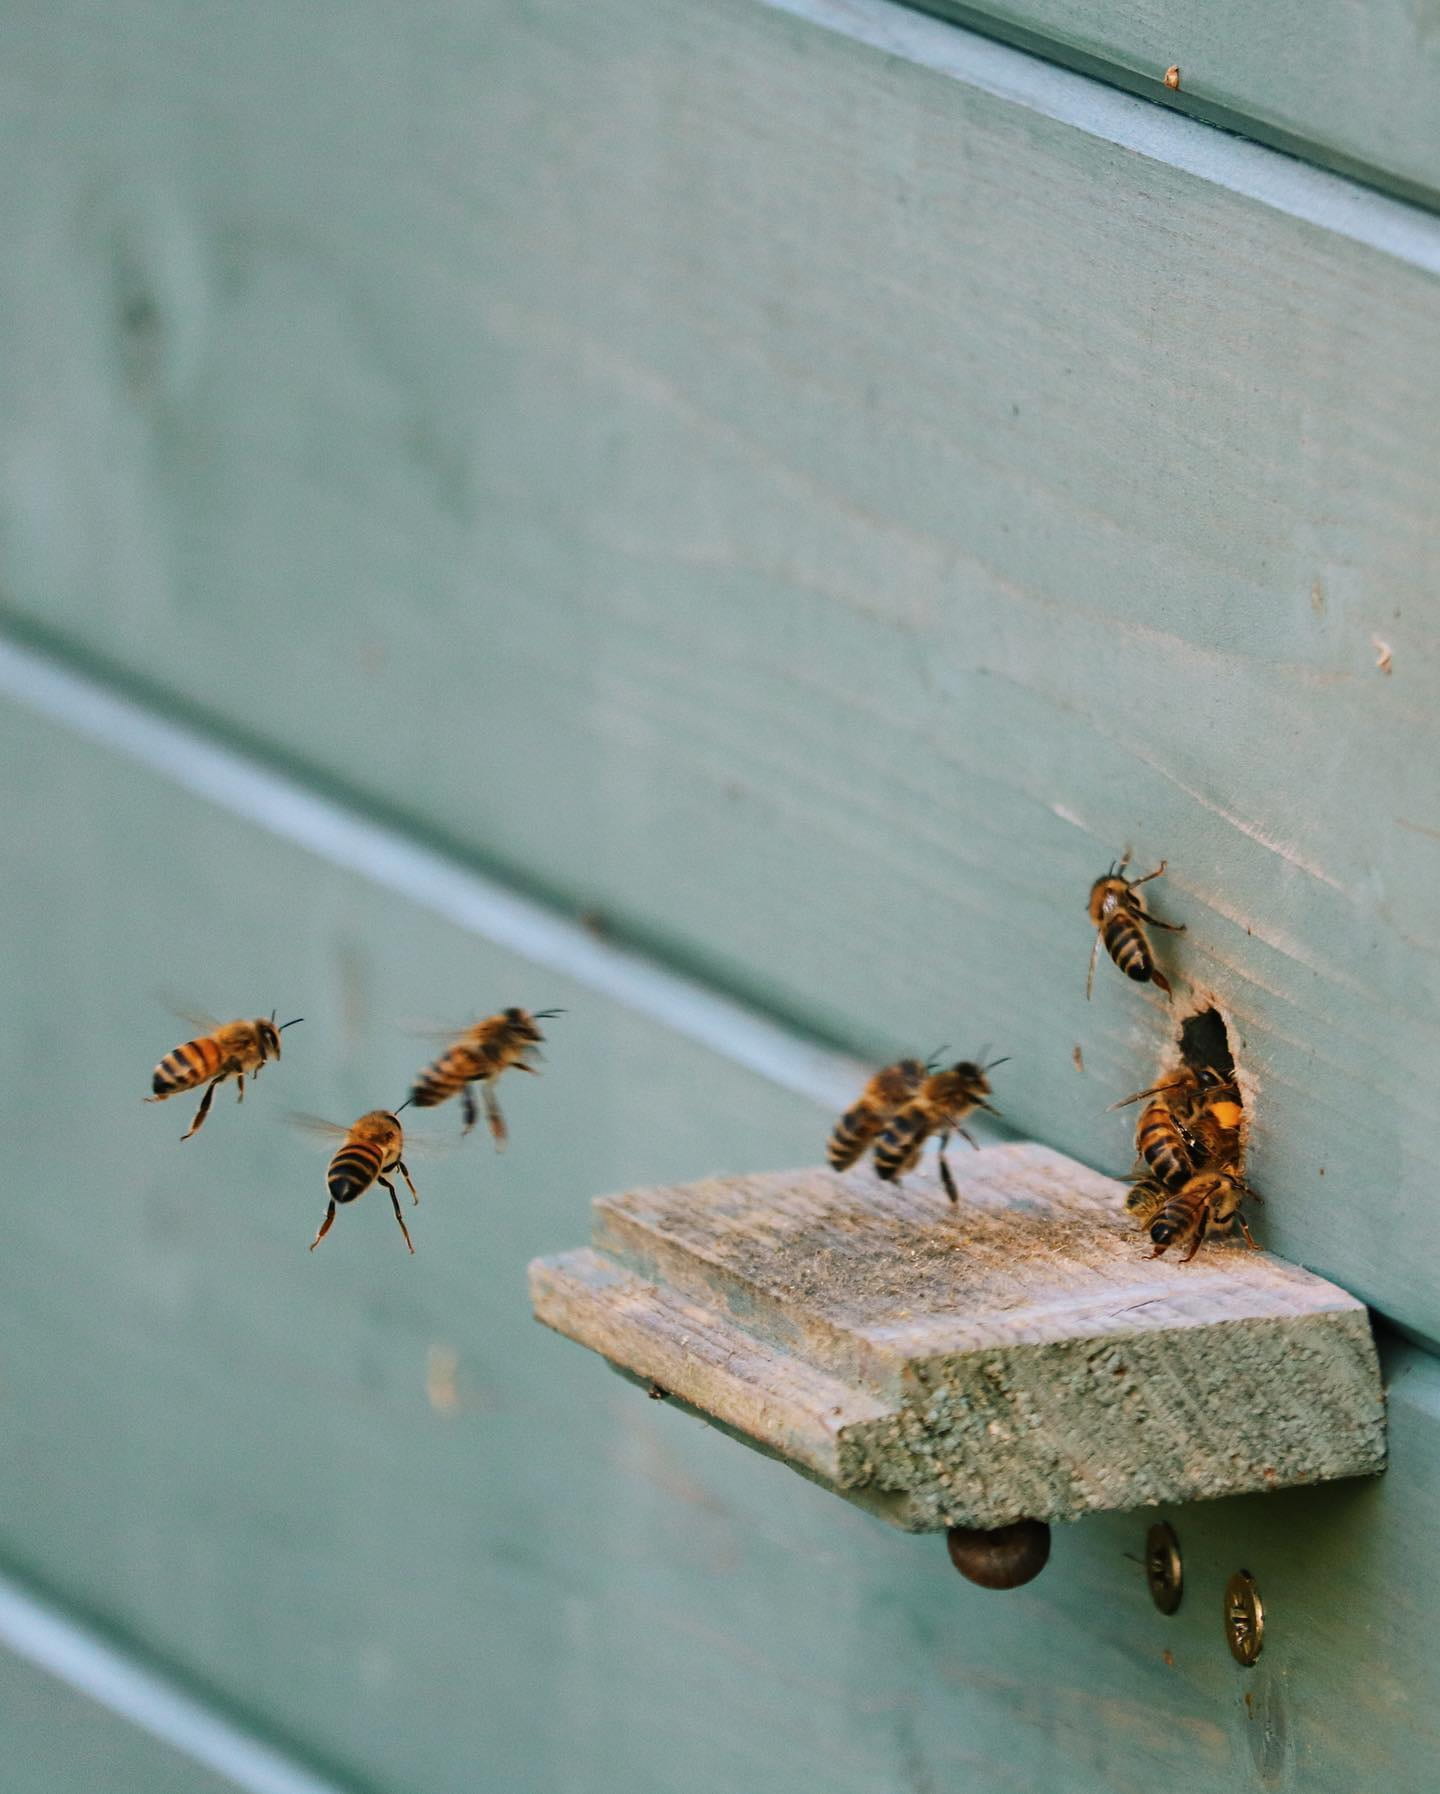 Image of bees coming into the entrance of the hive, a hole in a blue painted shed with a small shelf.